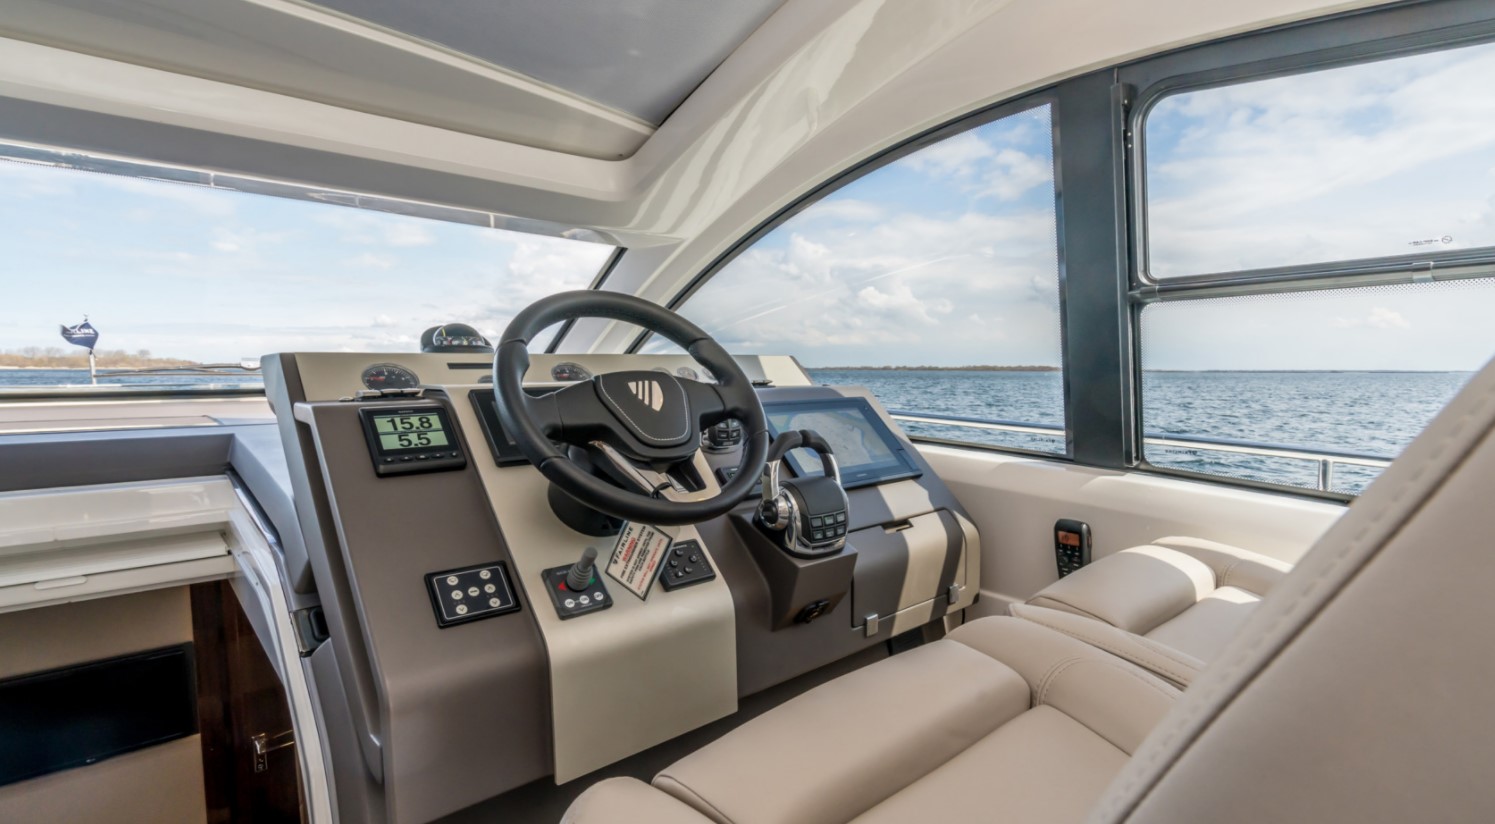 Contact Fairline South West